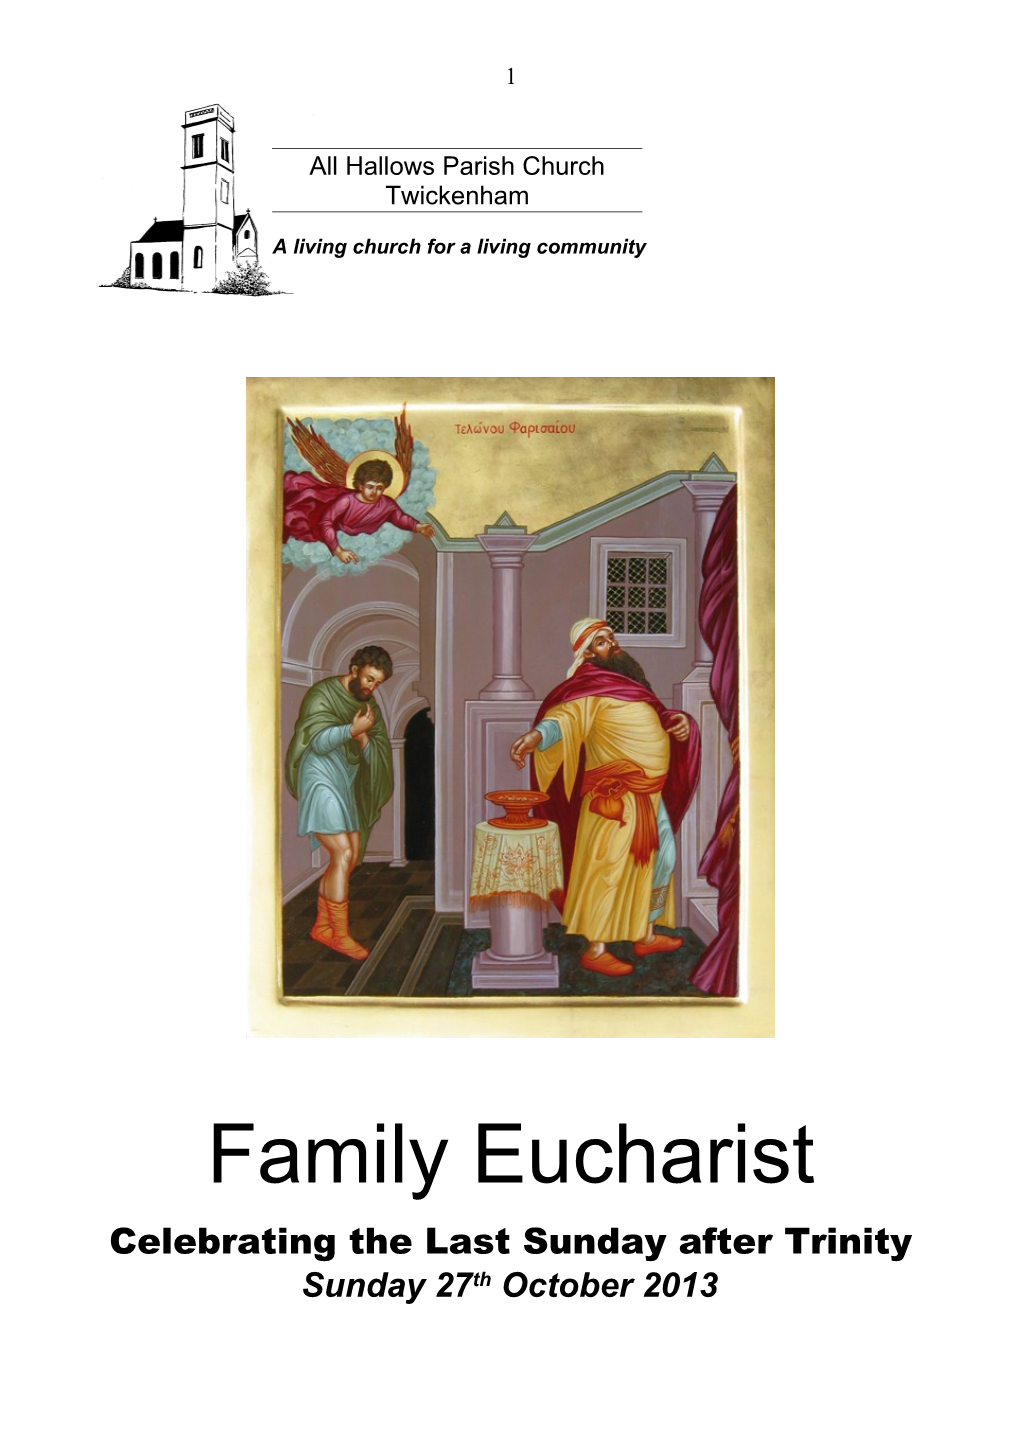 Notes for the Family Eucharist